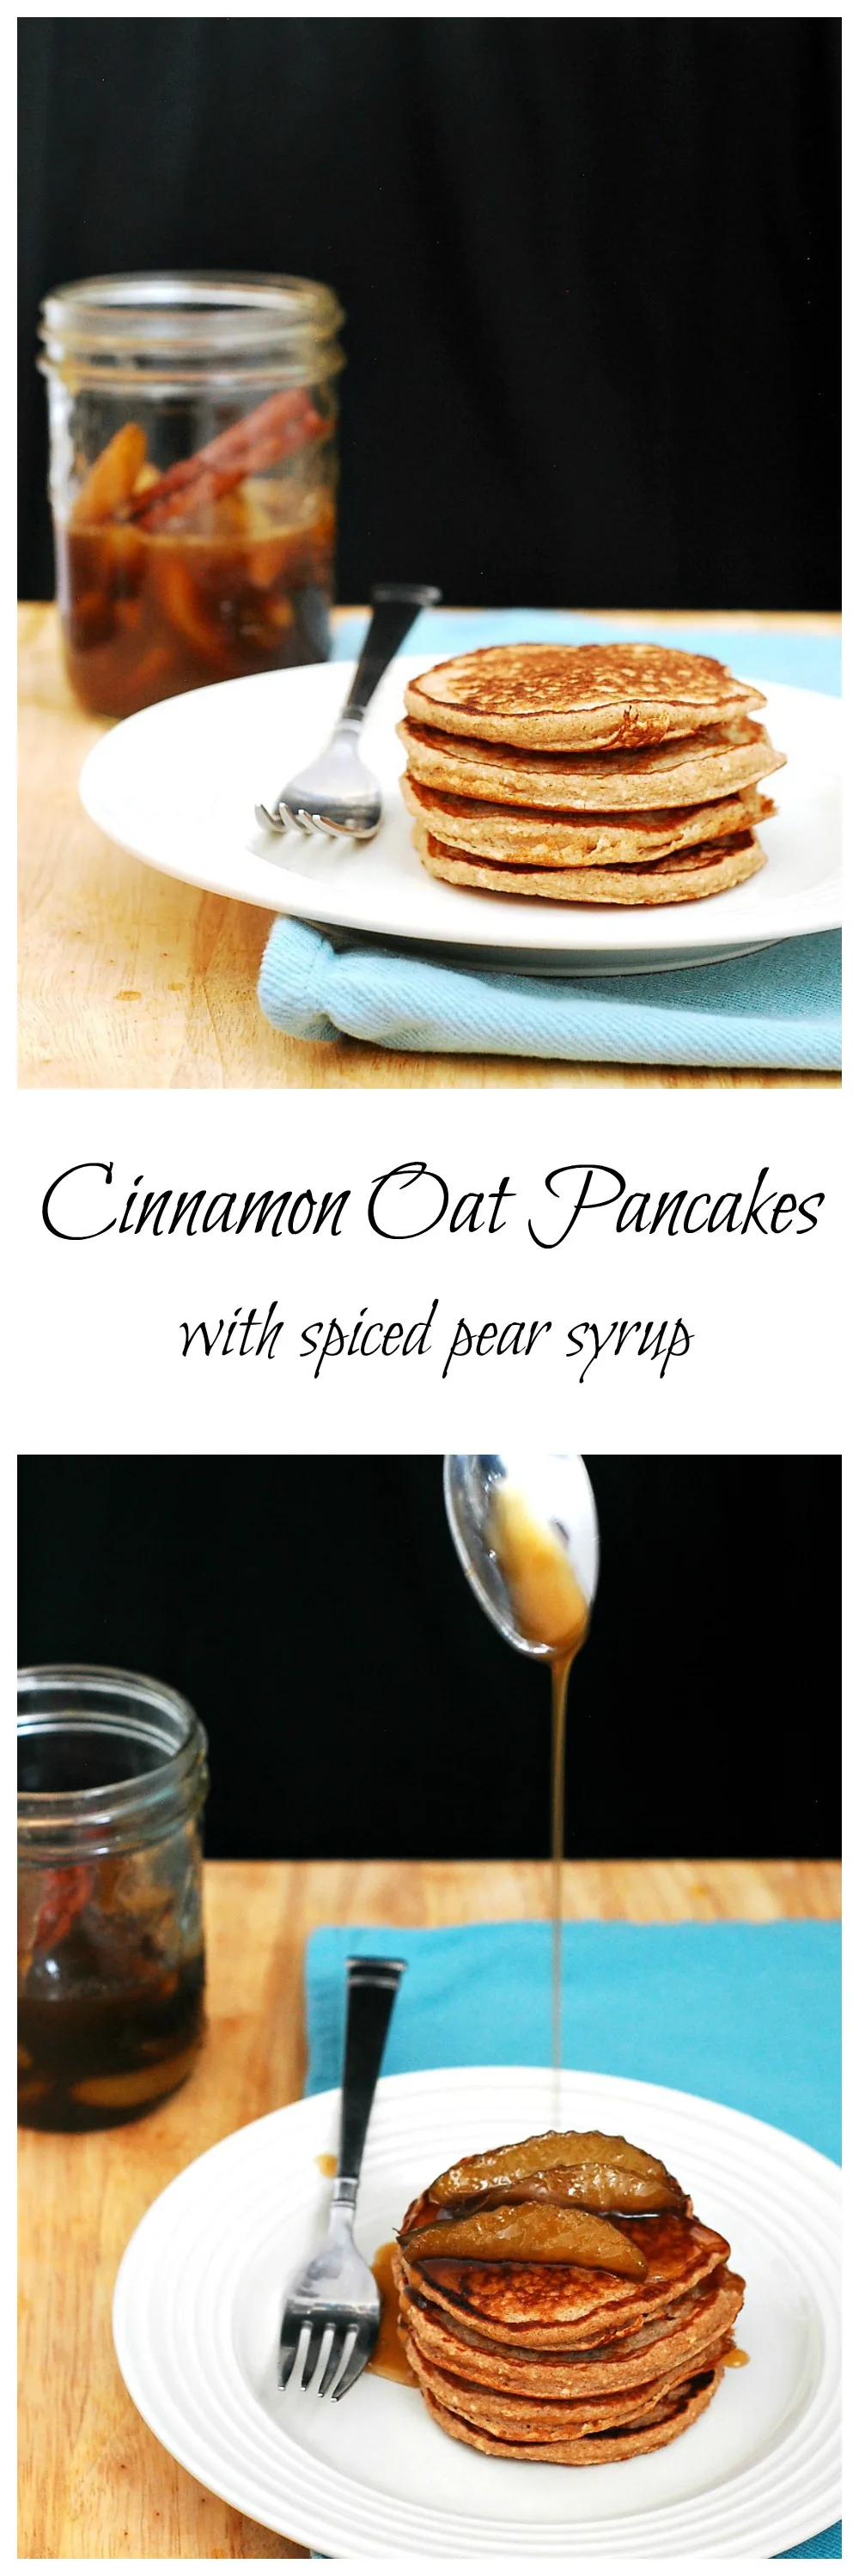 Make your brunch heart-healthy with these cinnamon oat pancakes, made with rolled oats and Greek yogurt, then drizzle on spiced pear-infused syrup. #BrunchWeek theredheadbaker.com